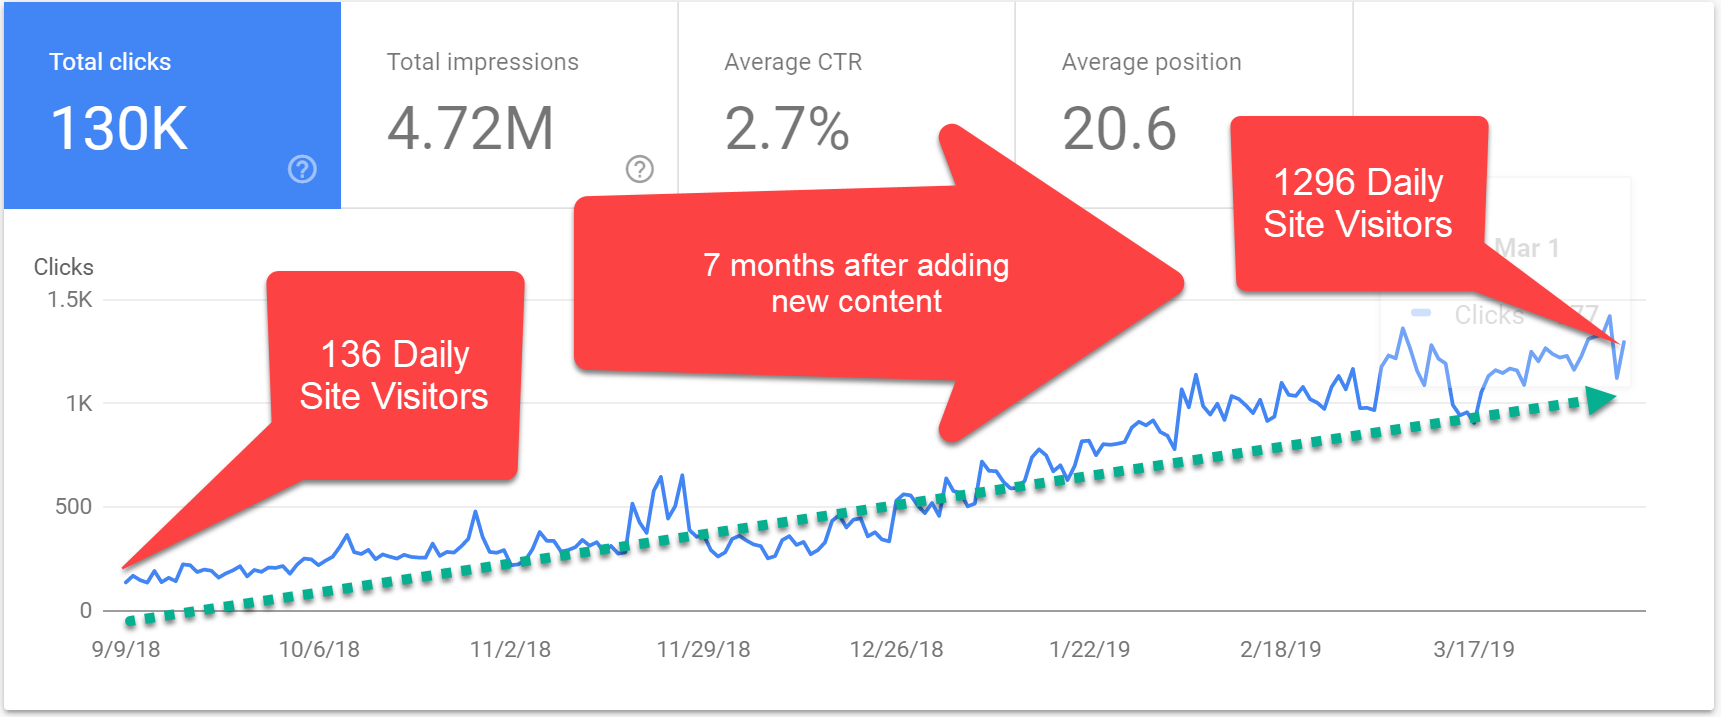 Content marketing case study shows 1000% increase in traffic over 7 months